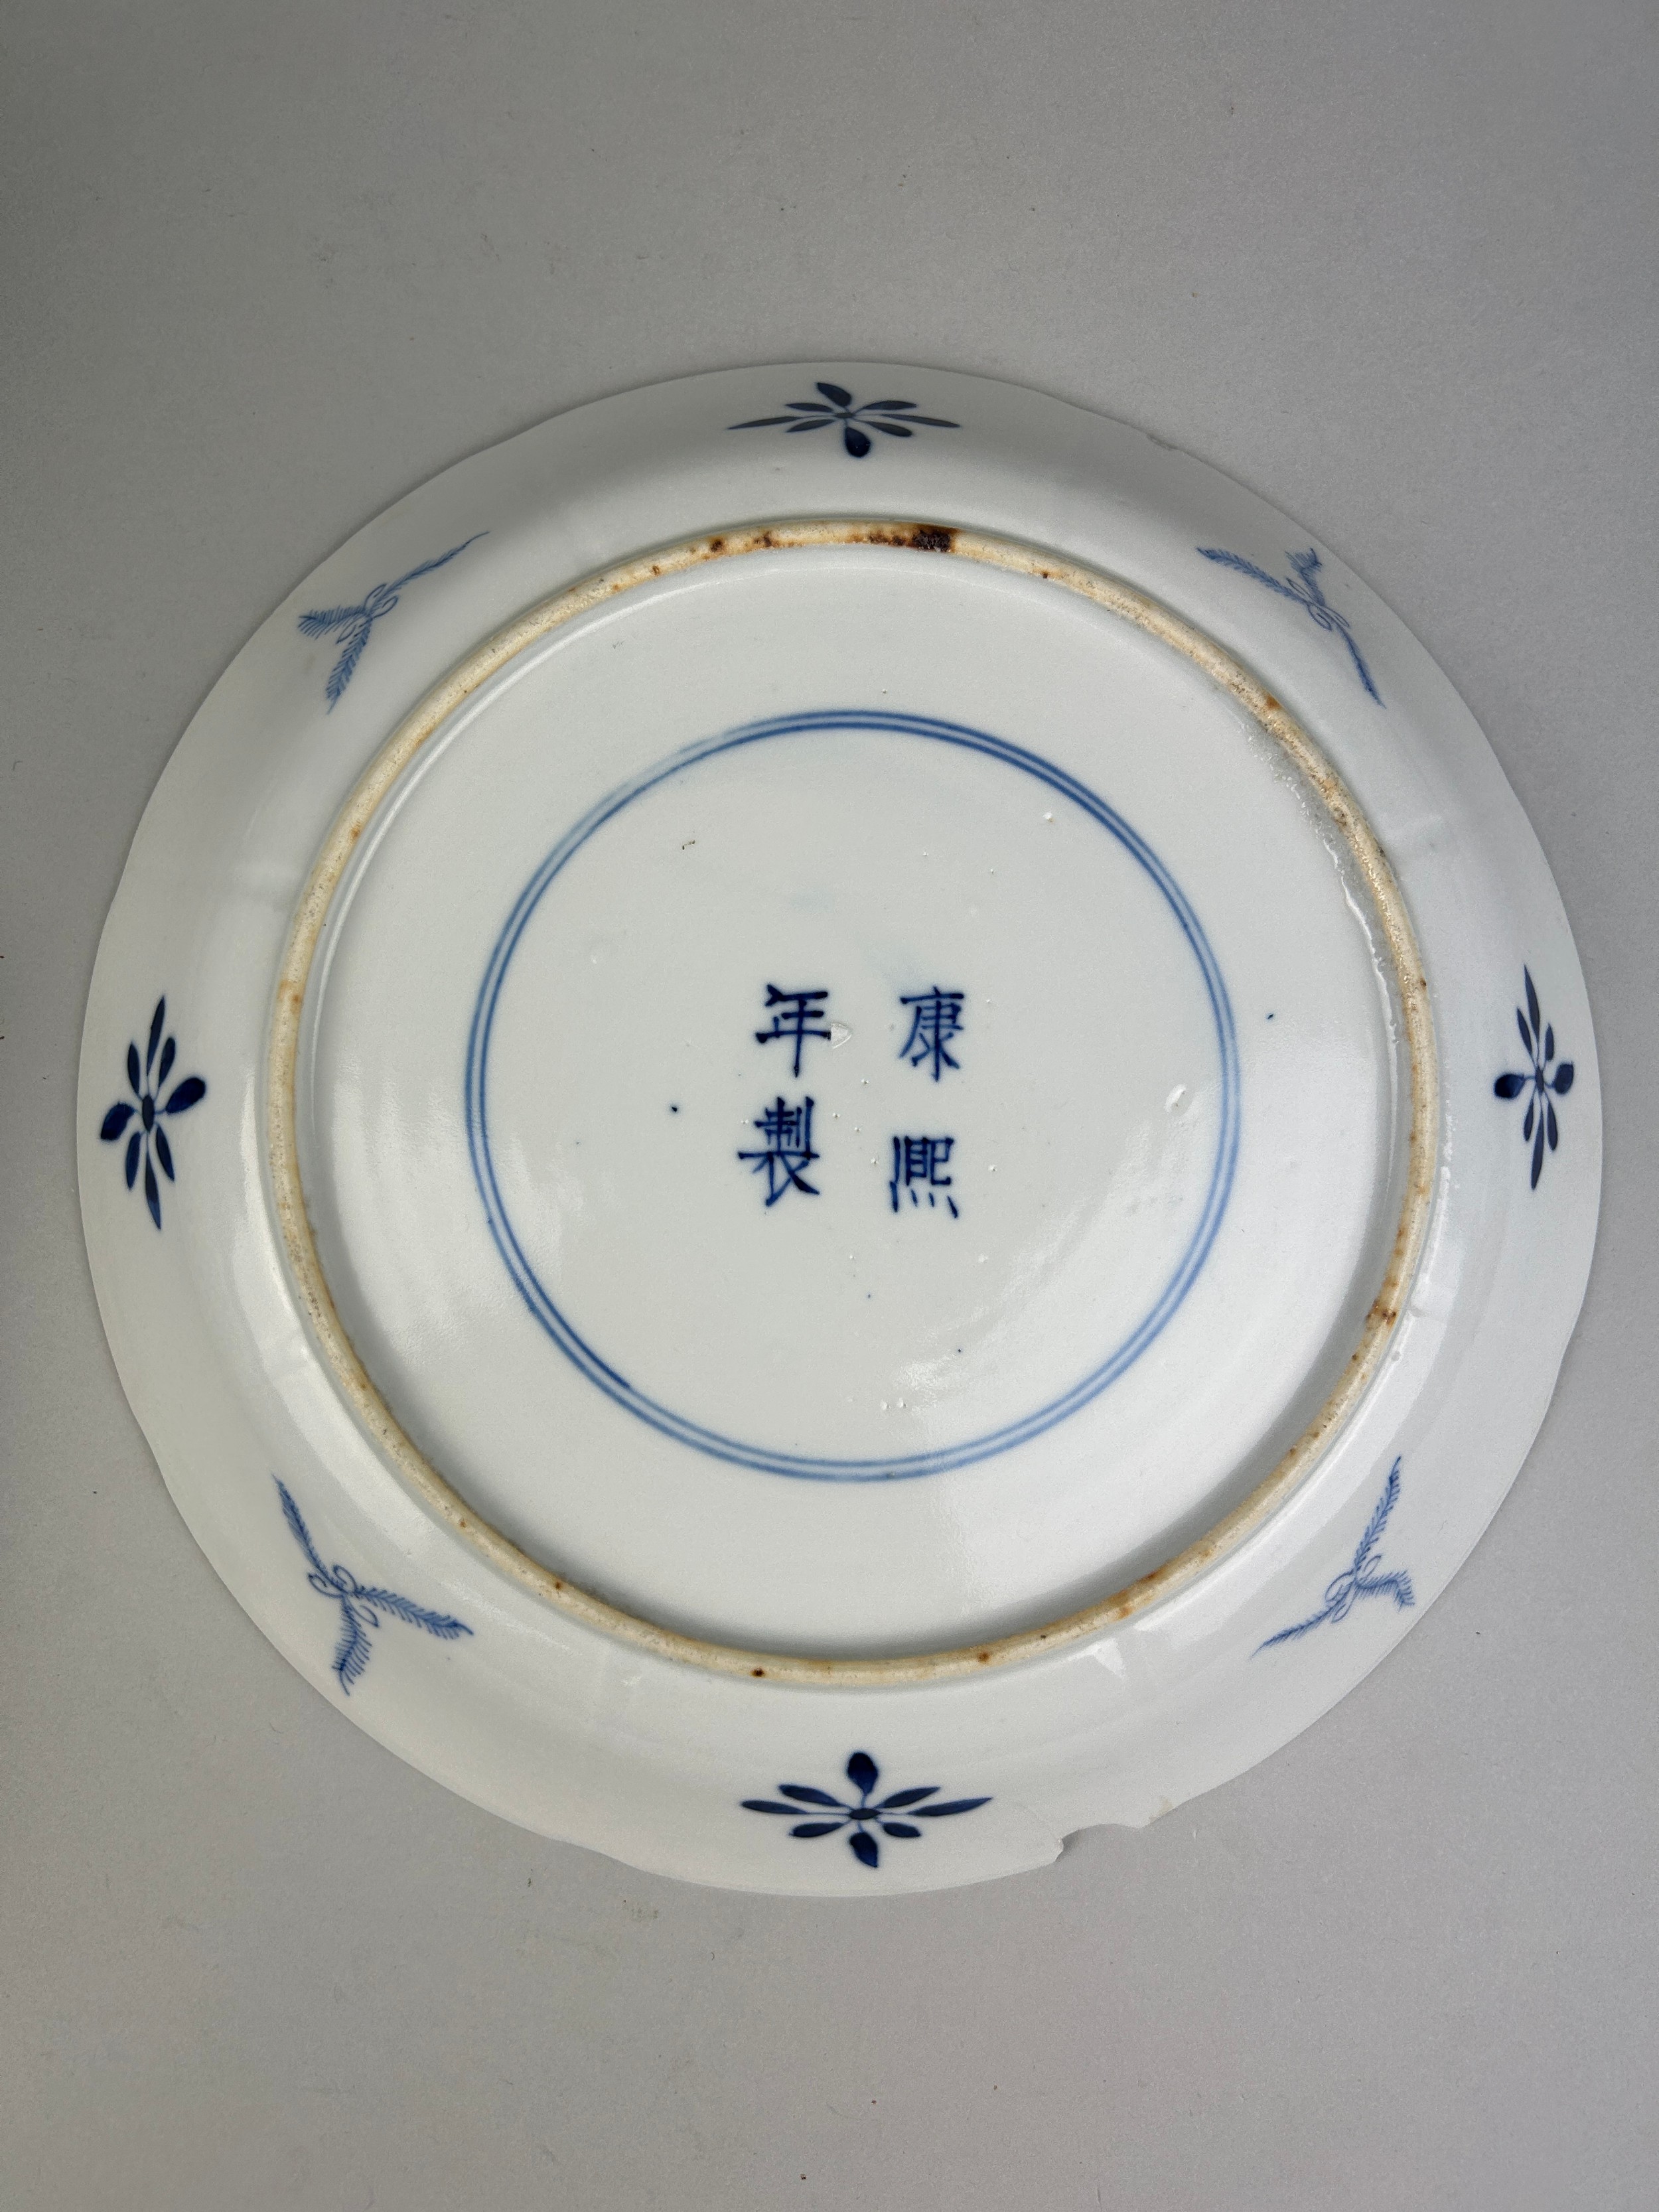 A 19TH CENTURY LARGE CHINESE BLUE AND WHITE PORCELAIN DISH DECORATED WITH AQUATIC CREATURES, - Image 6 of 6